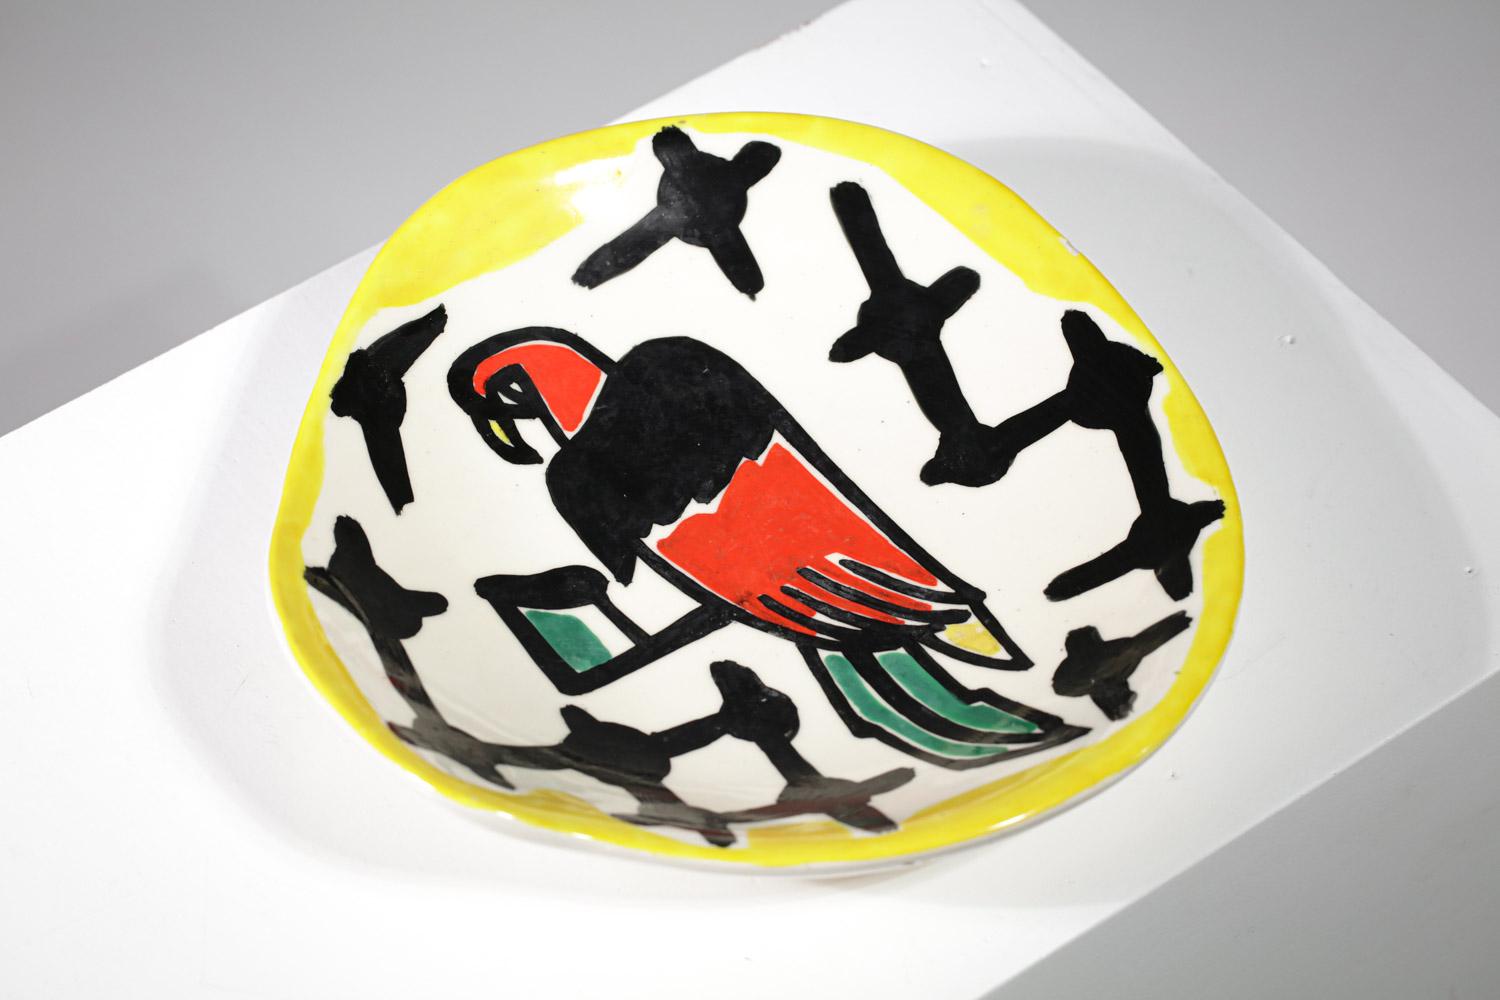 Dish or cup of the Fifties of the French ceramist Roland Brice coming from the workshops of Biot. Free-form bowl in white earthenware with a painted decoration representing a parrot in bright colors typical of the artist and the style of Fernand